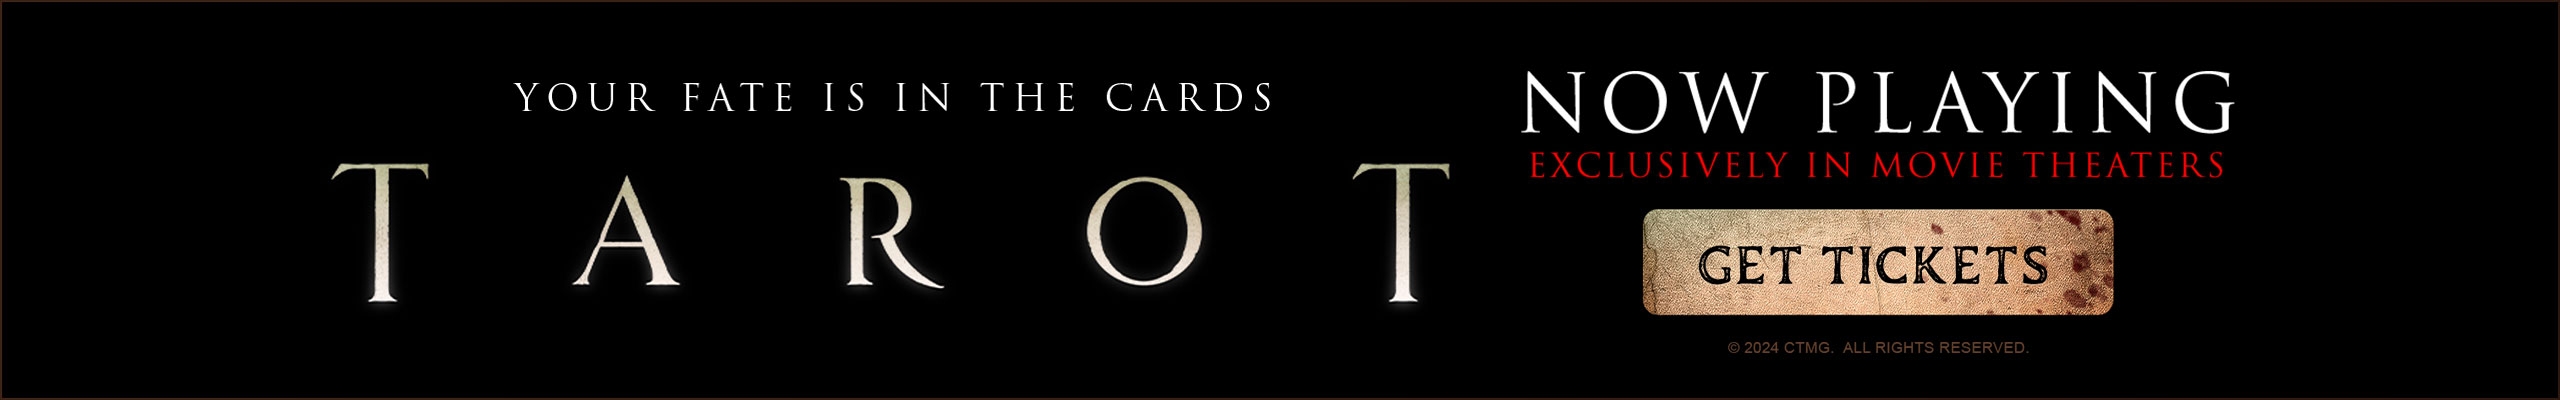 Tarot, now playing in theatres. Get tickets